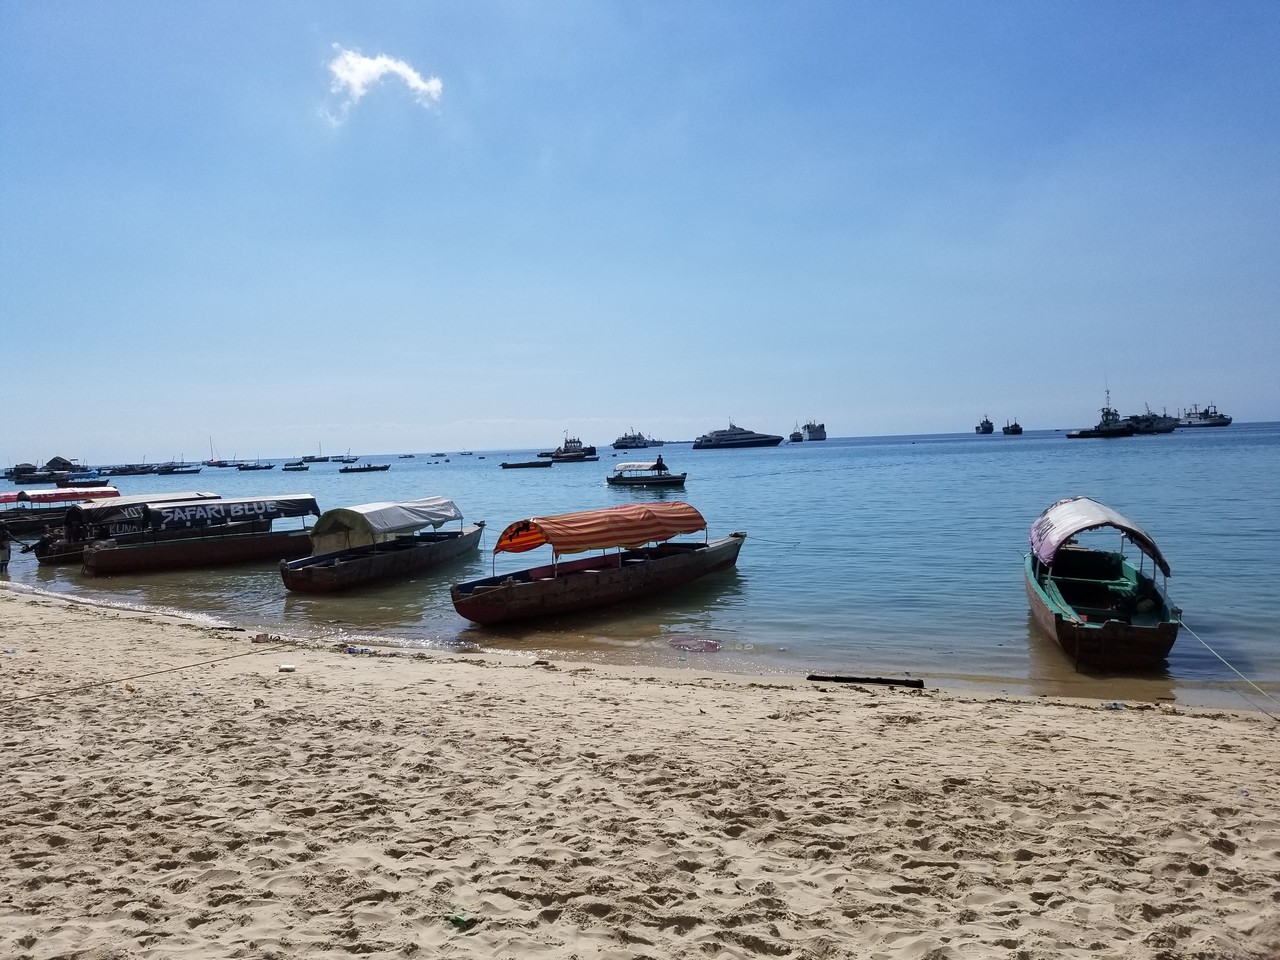 boats on a beach with boats